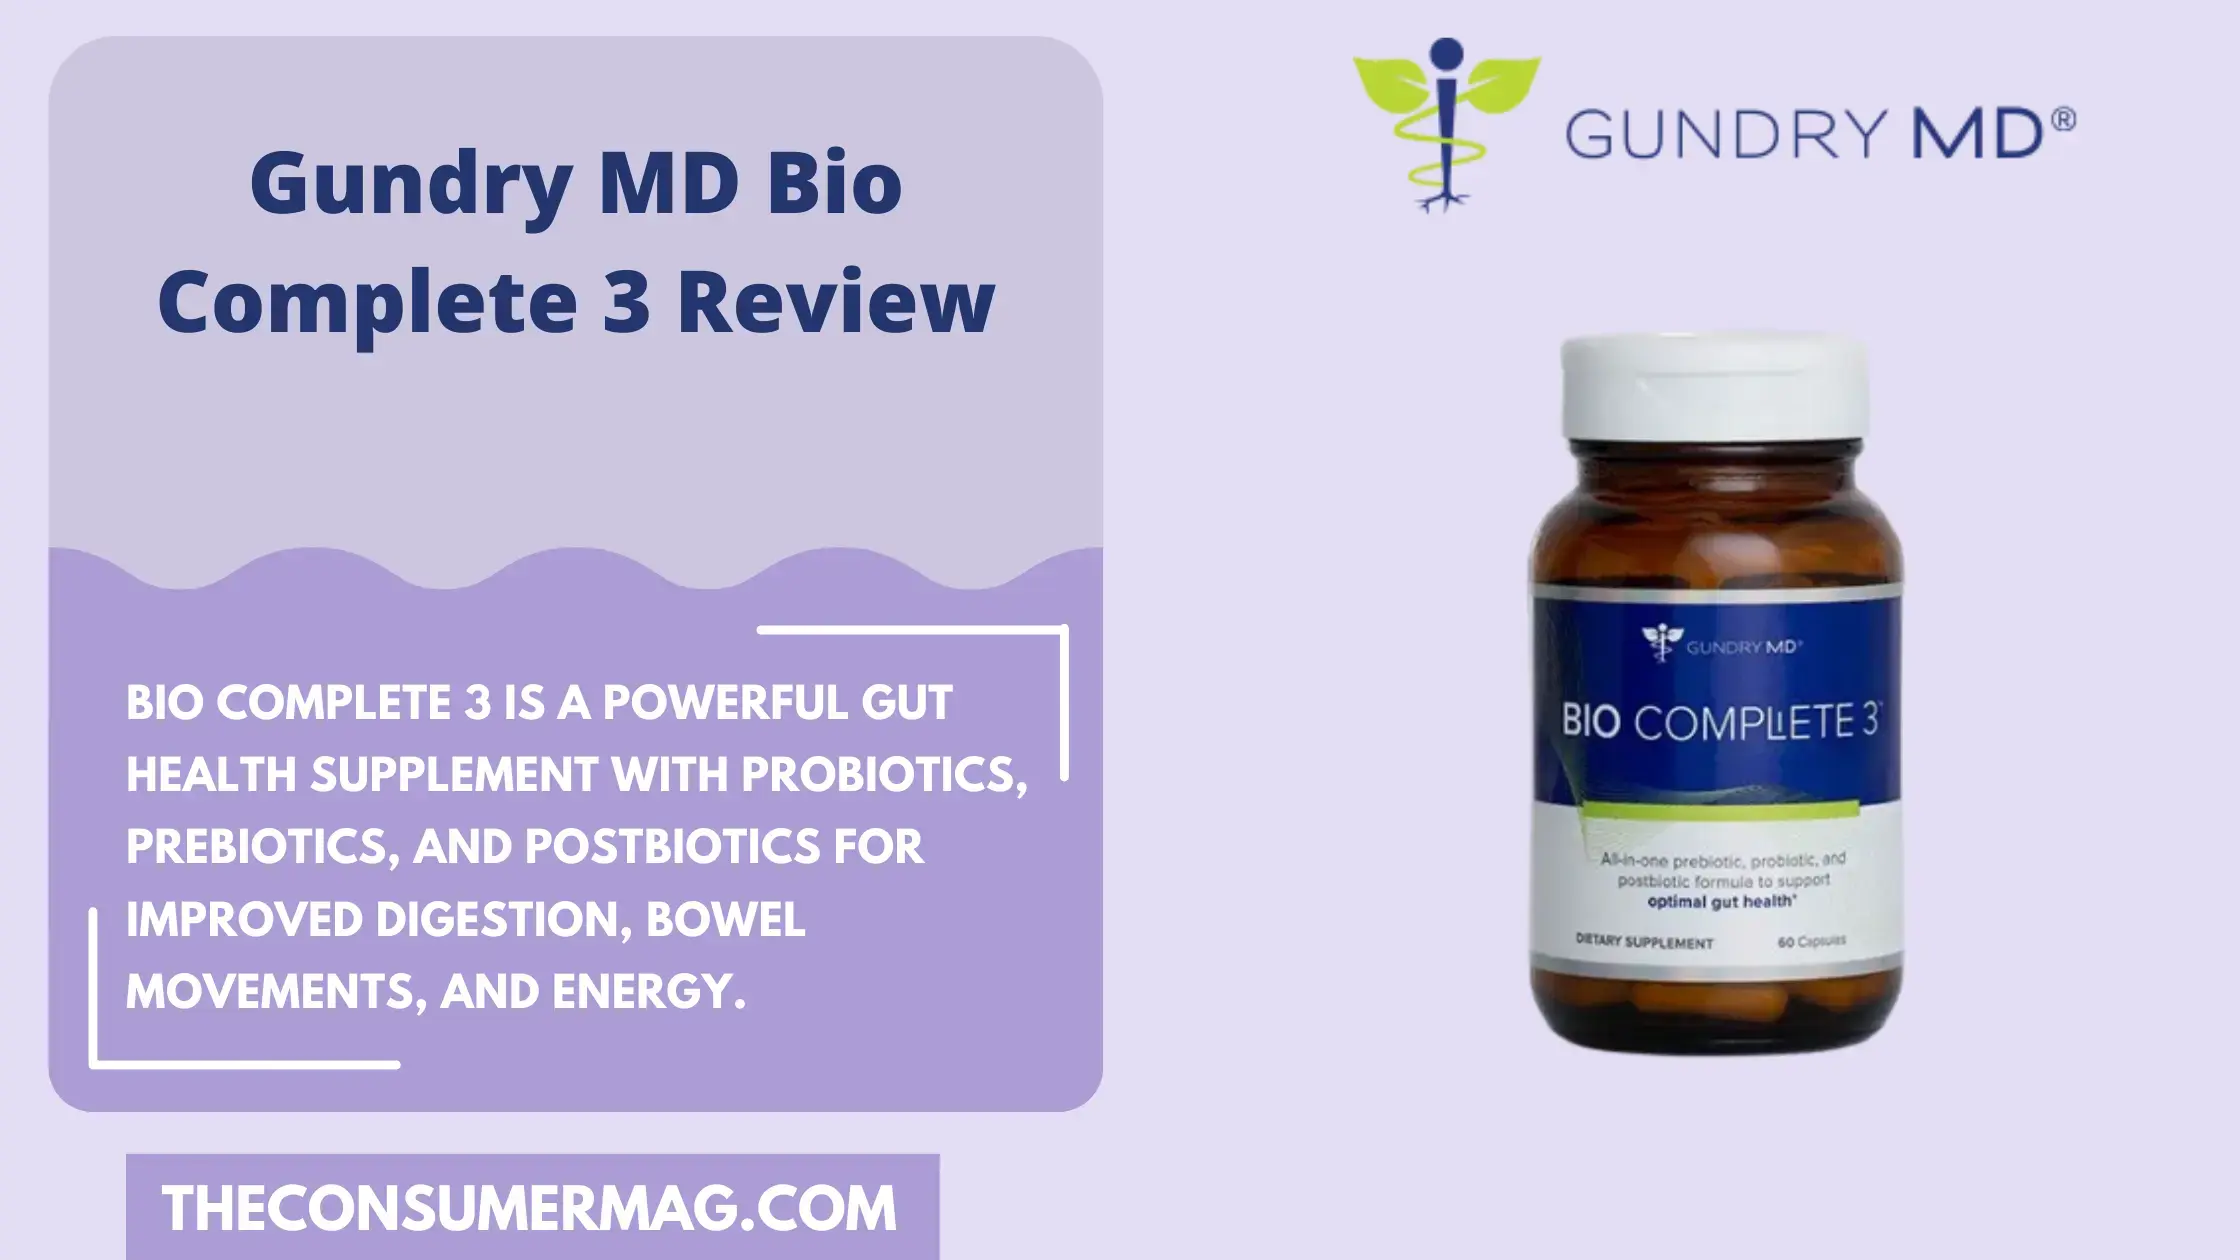 Gundry MD Bio Complete 3 Reviews | Save 30% Now!